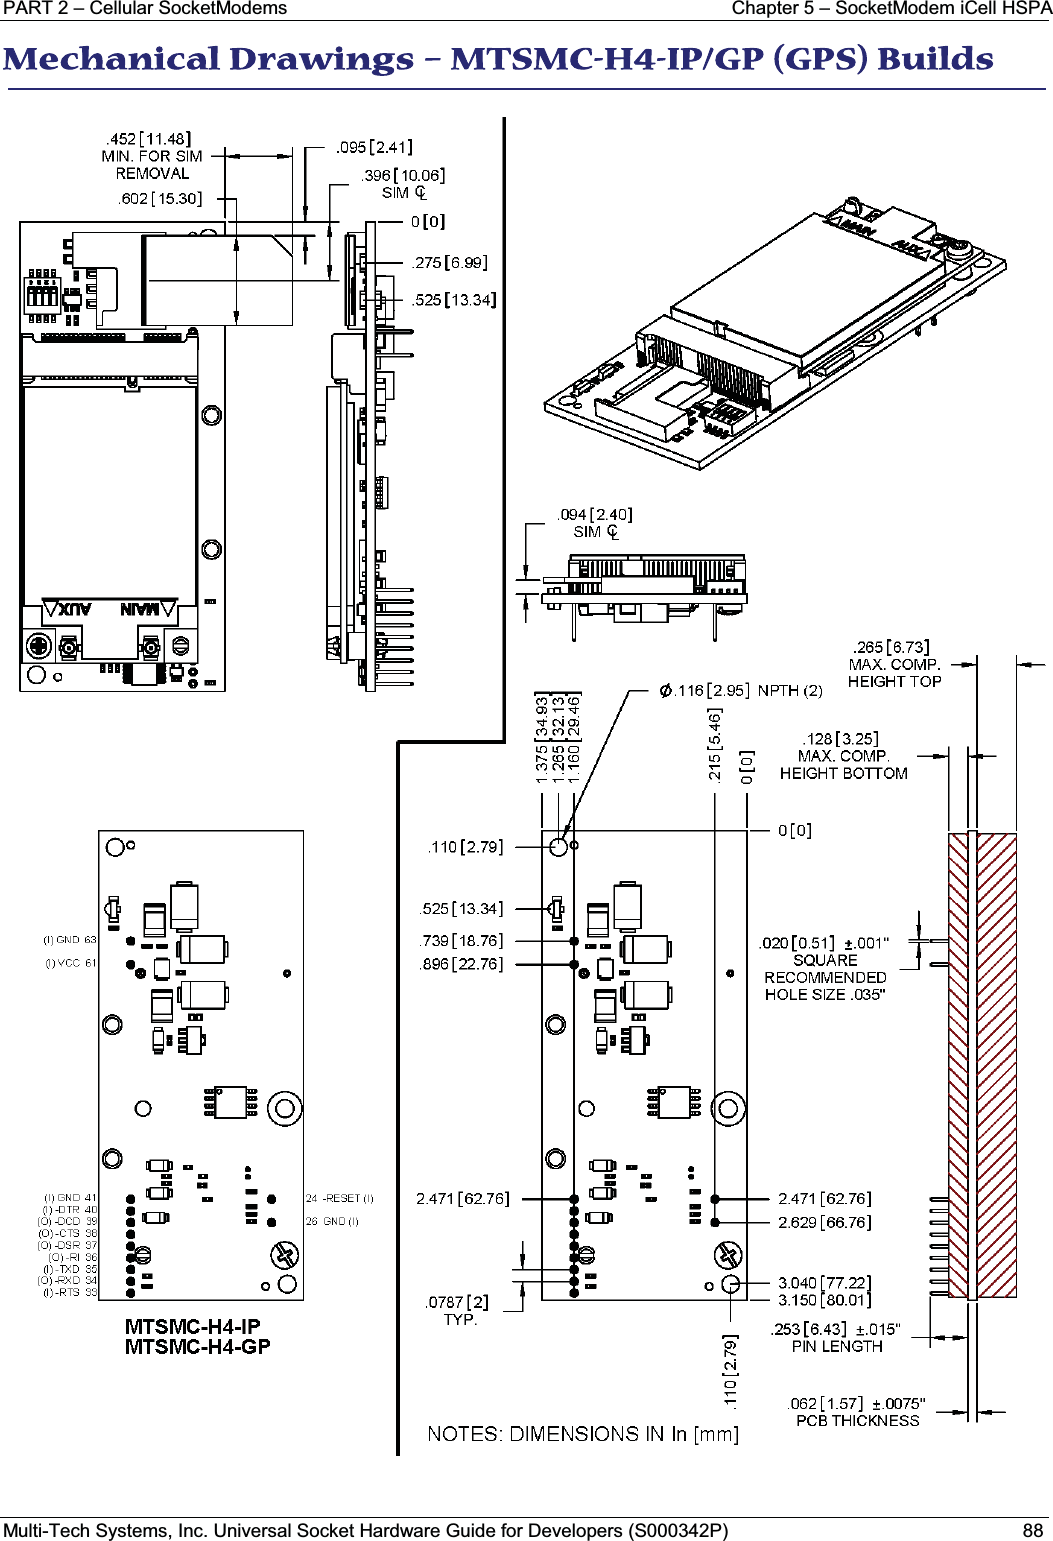 PART 2 – Cellular SocketModems Chapter 5 – SocketModem iCell HSPAMulti-Tech Systems, Inc. Universal Socket Hardware Guide for Developers (S000342P) 88MMechanical Drawings – MTSMC-H4-IP/GP (GPS) Builds 